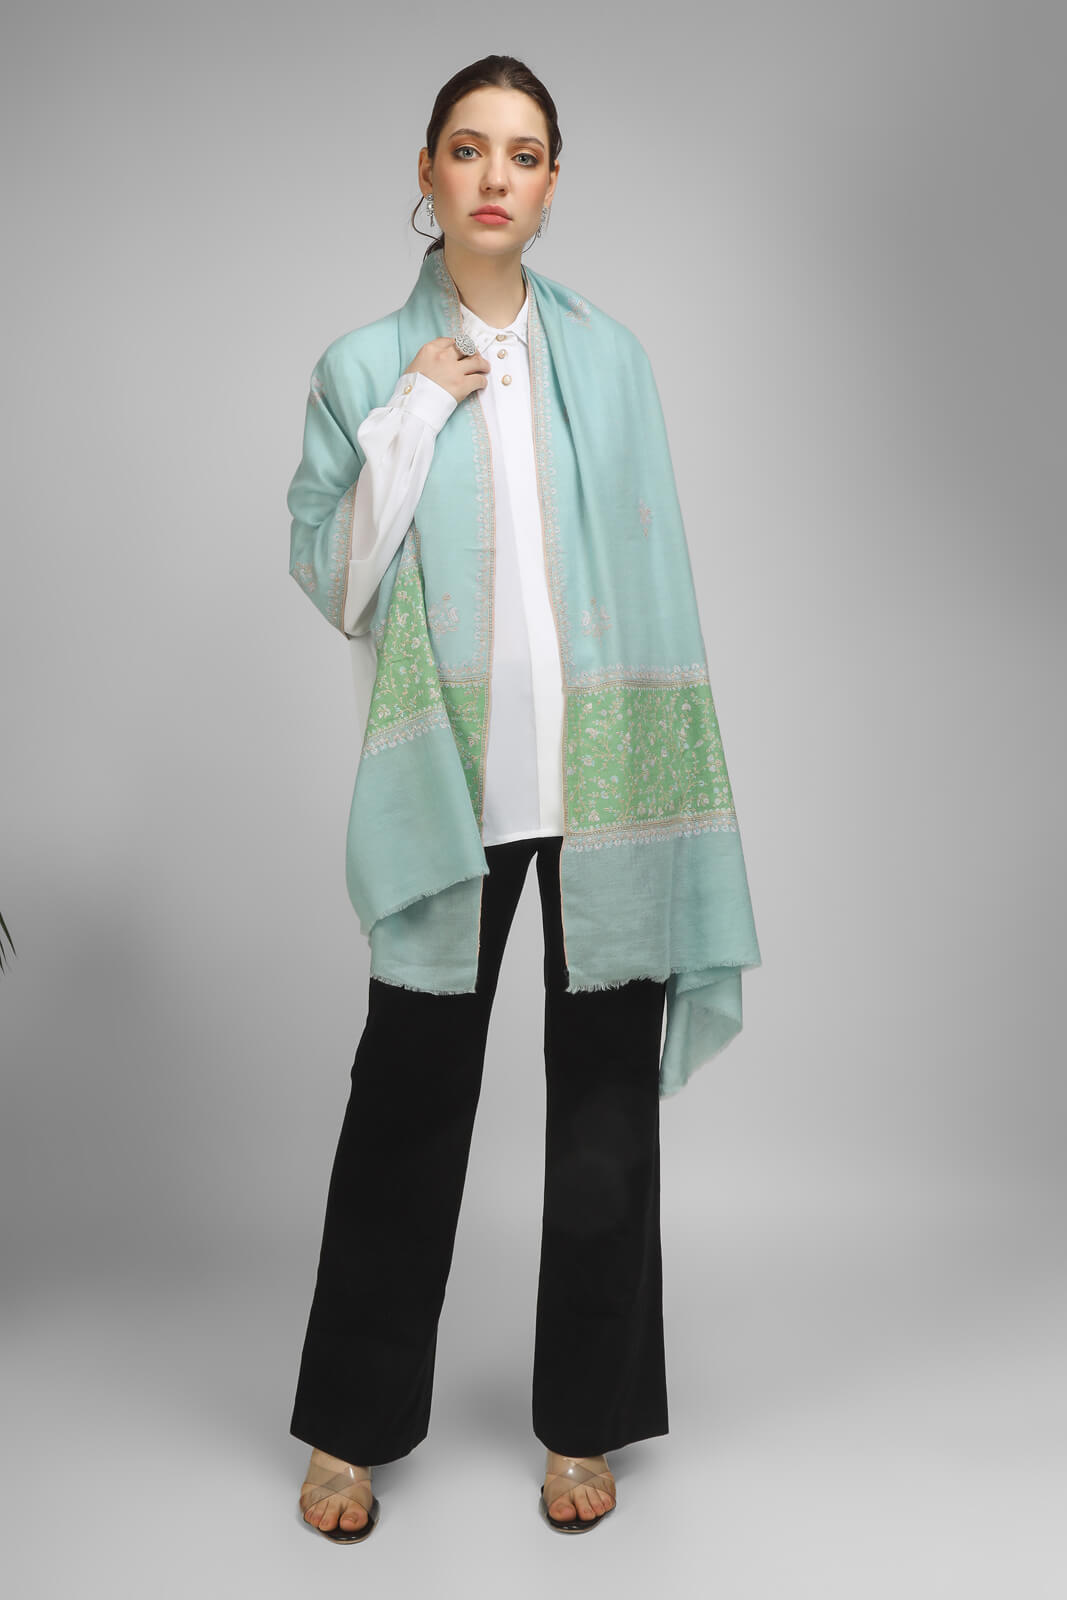 PASHMINA EMBROIDERY STOLE -  Light Turquoise Pashmina Paladaar stole - We deliver exquisite products to your doorstep in the United States